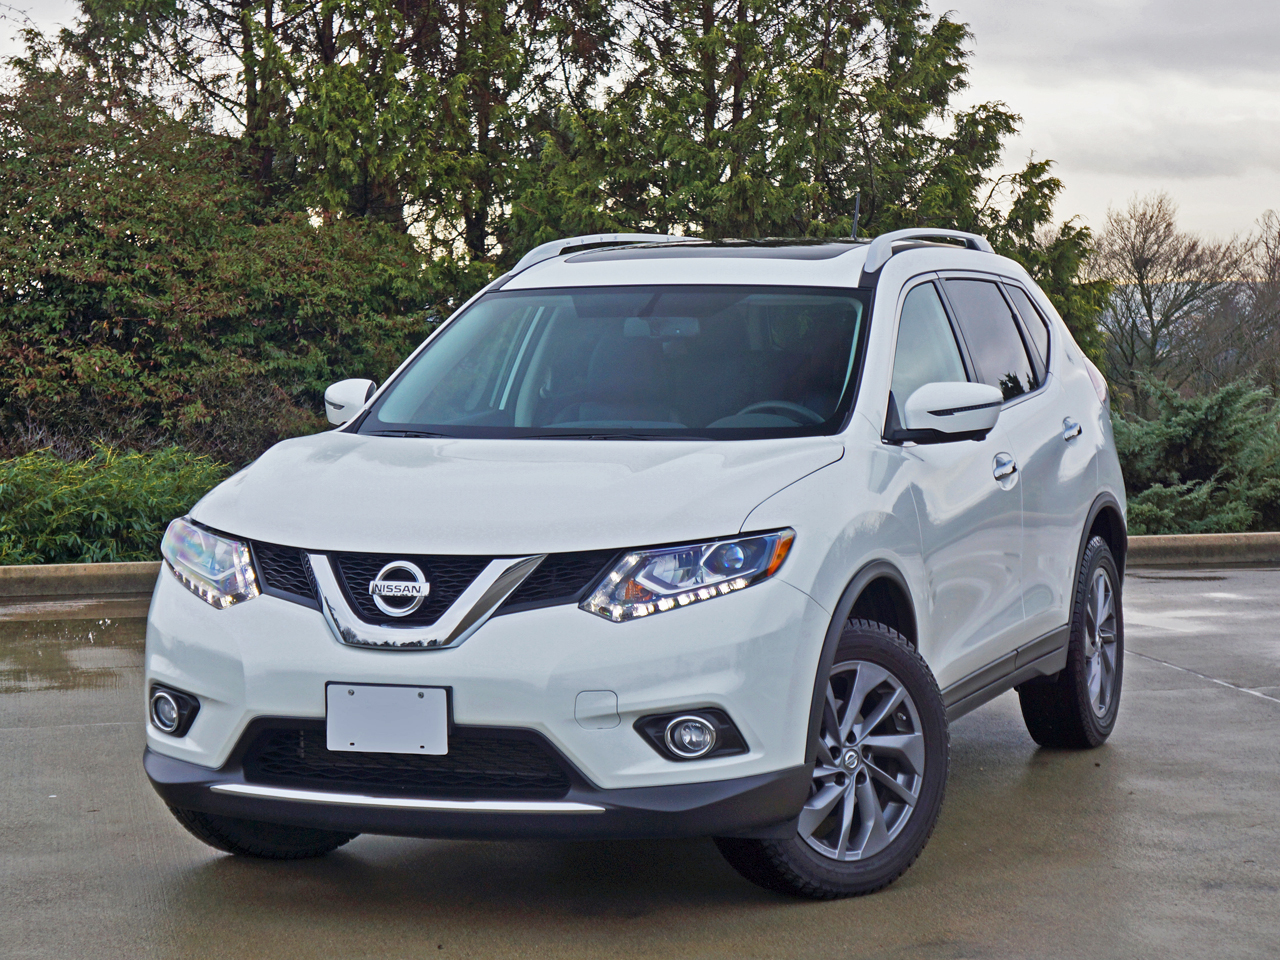 2016 Nissan Rogue Sl Premium Awd Road Test Review